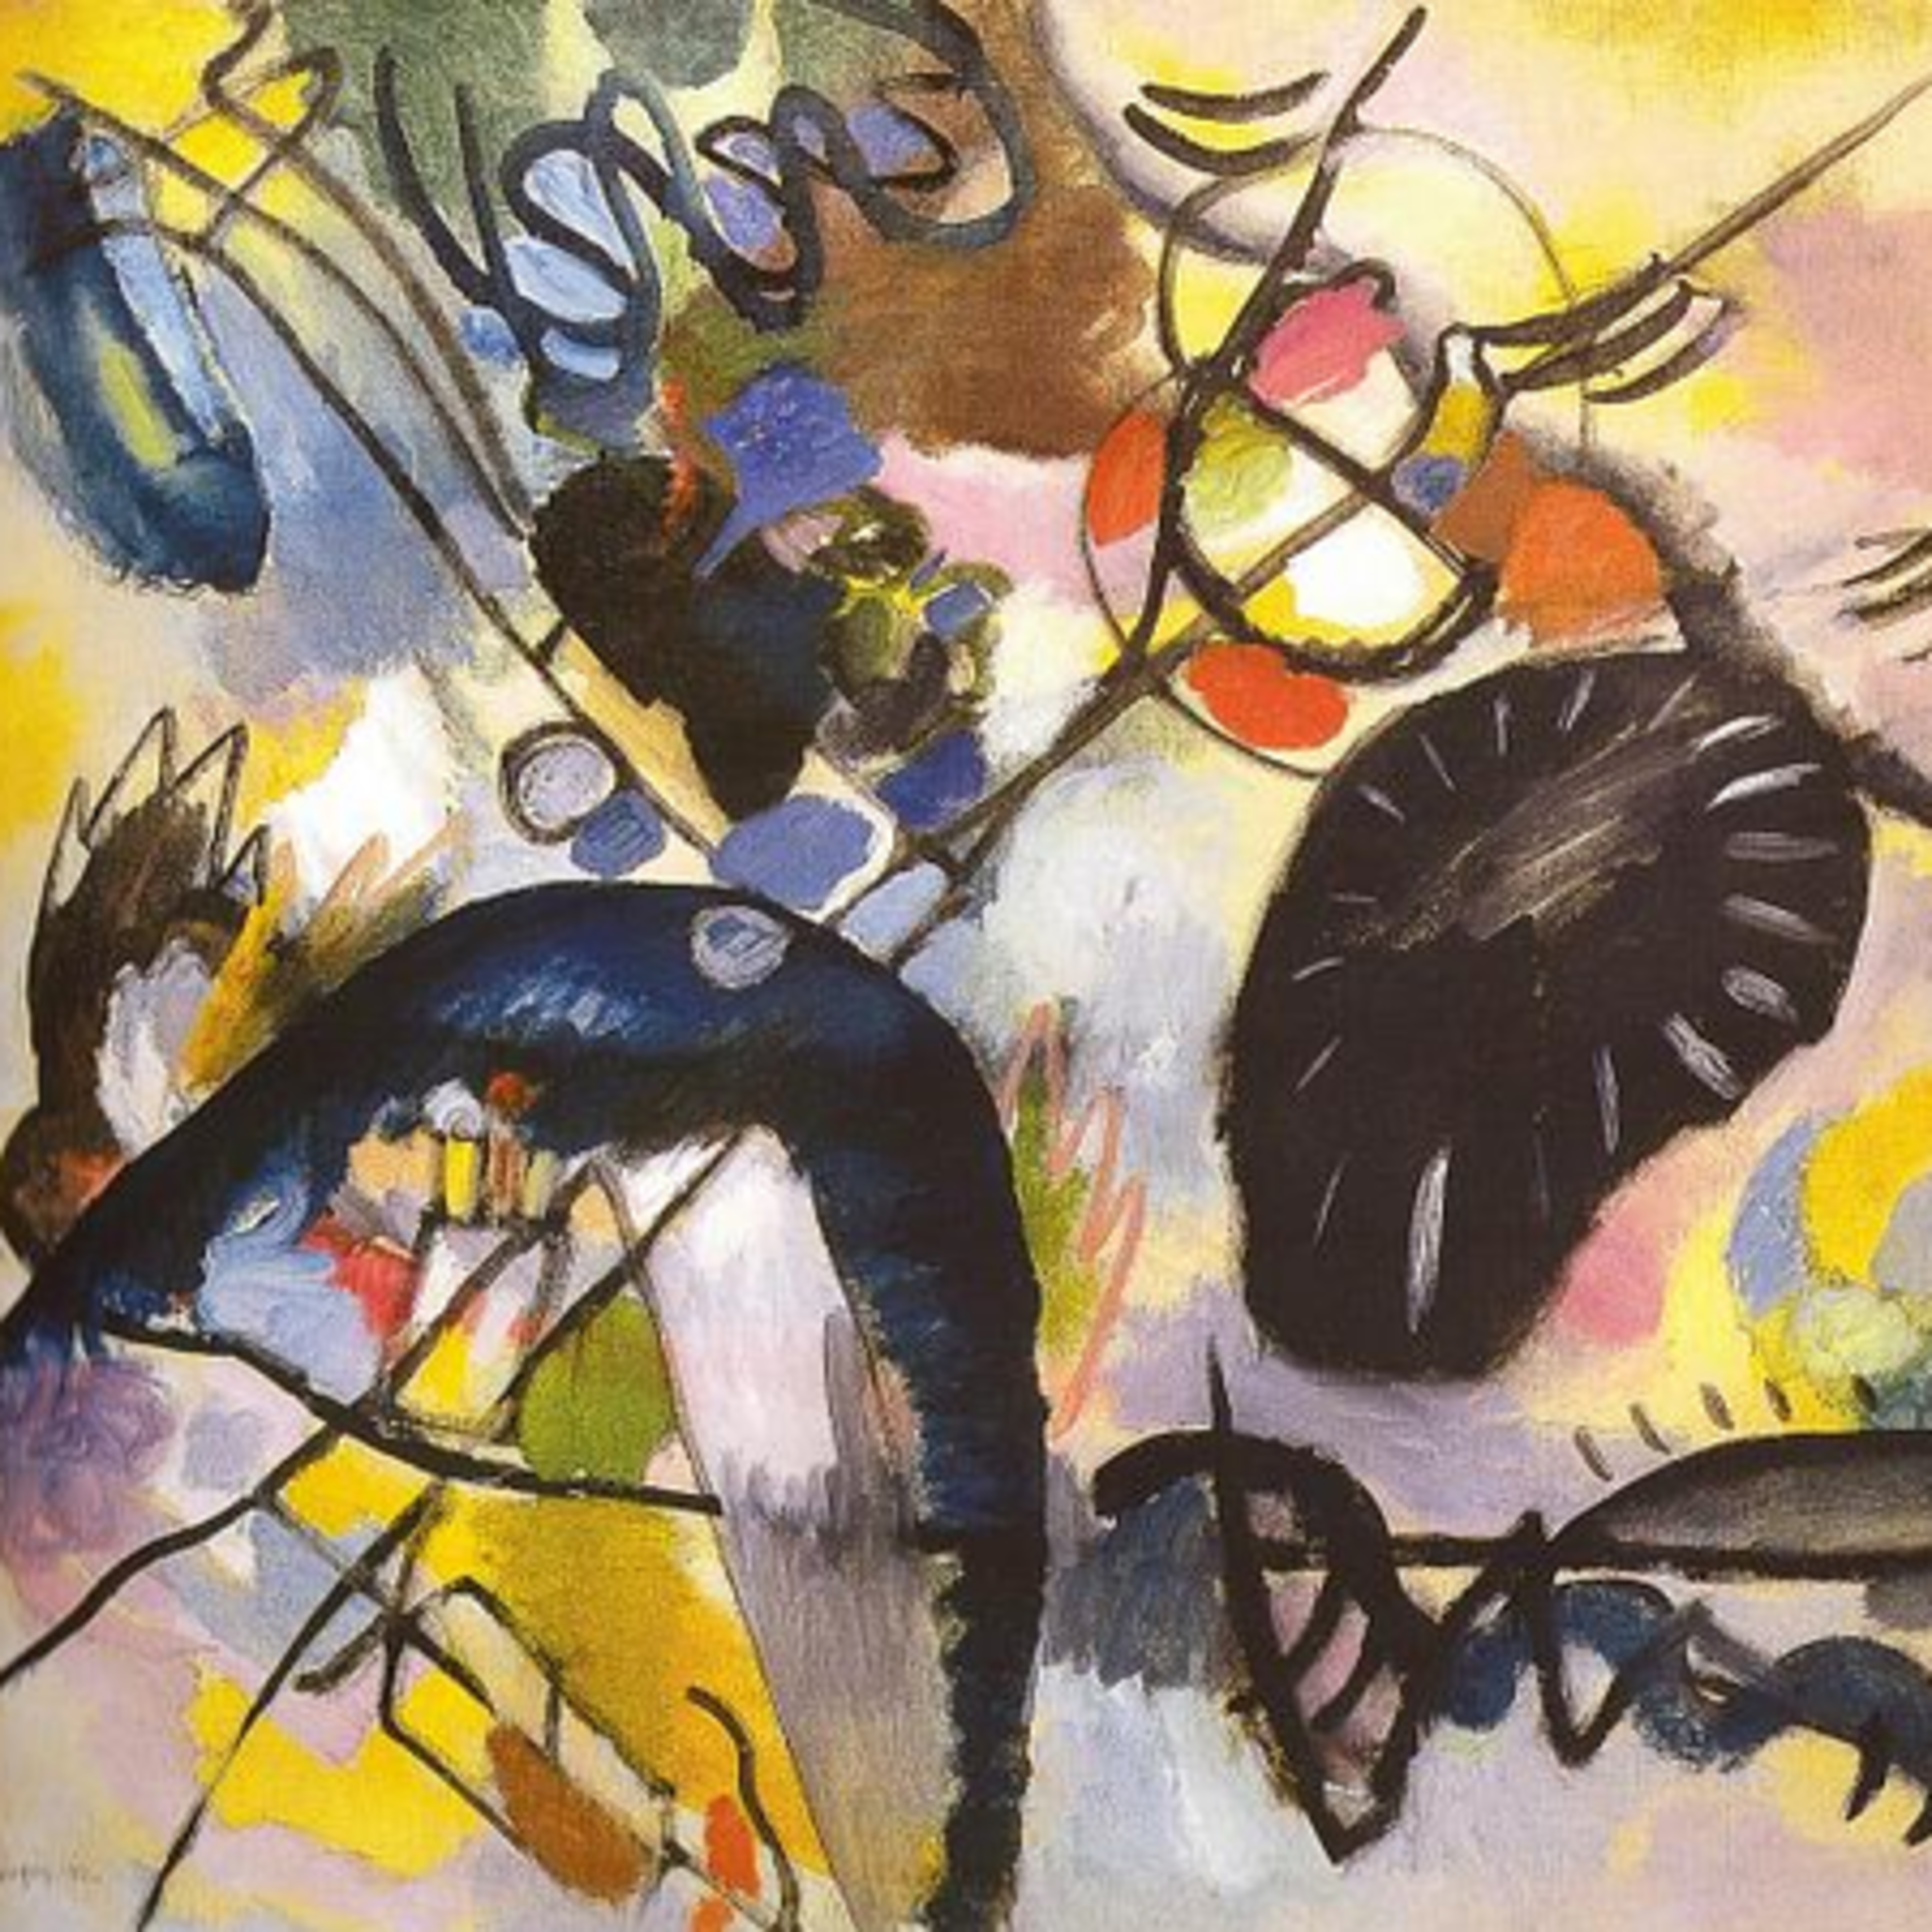 The exhibition Kandinsky and Russia